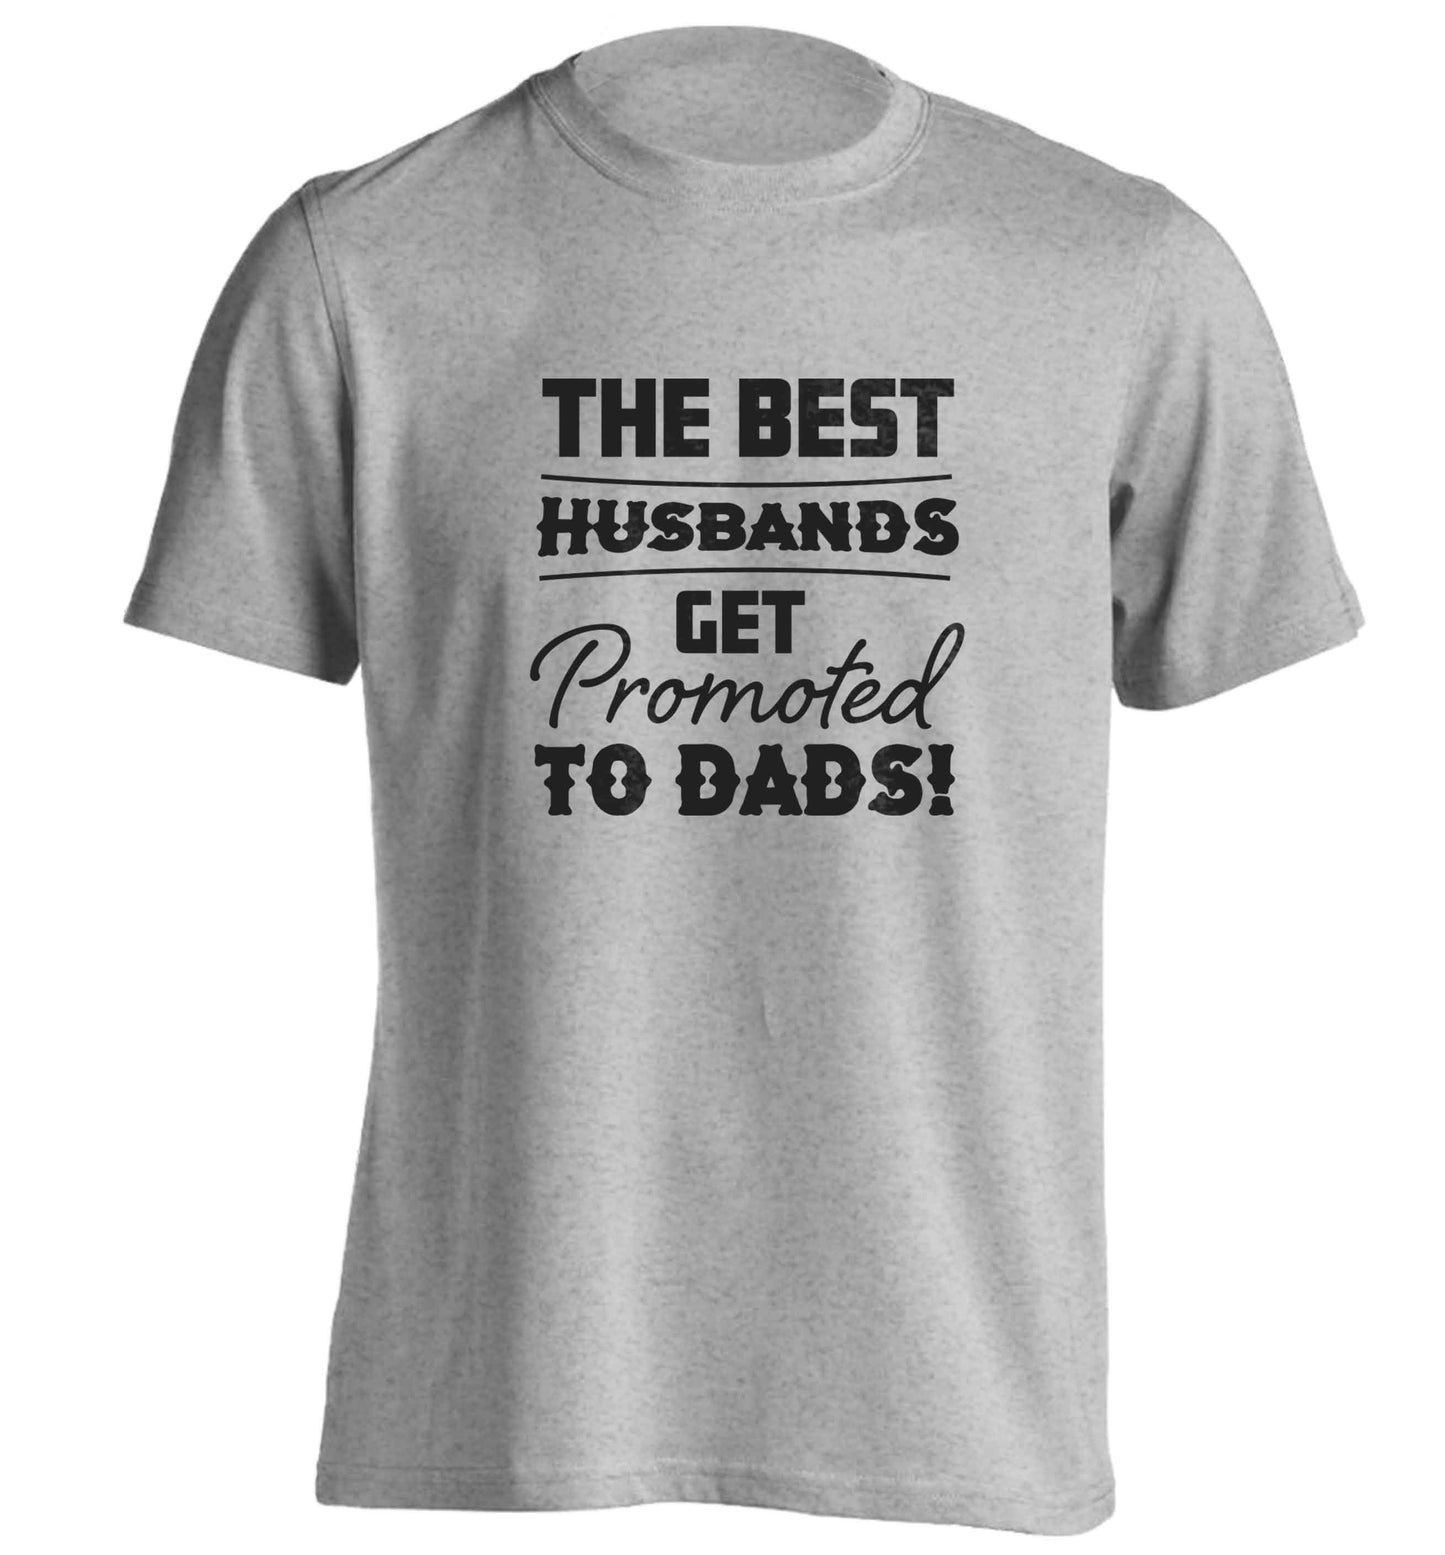 The best husbands get promoted to Dads adults unisex grey Tshirt 2XL